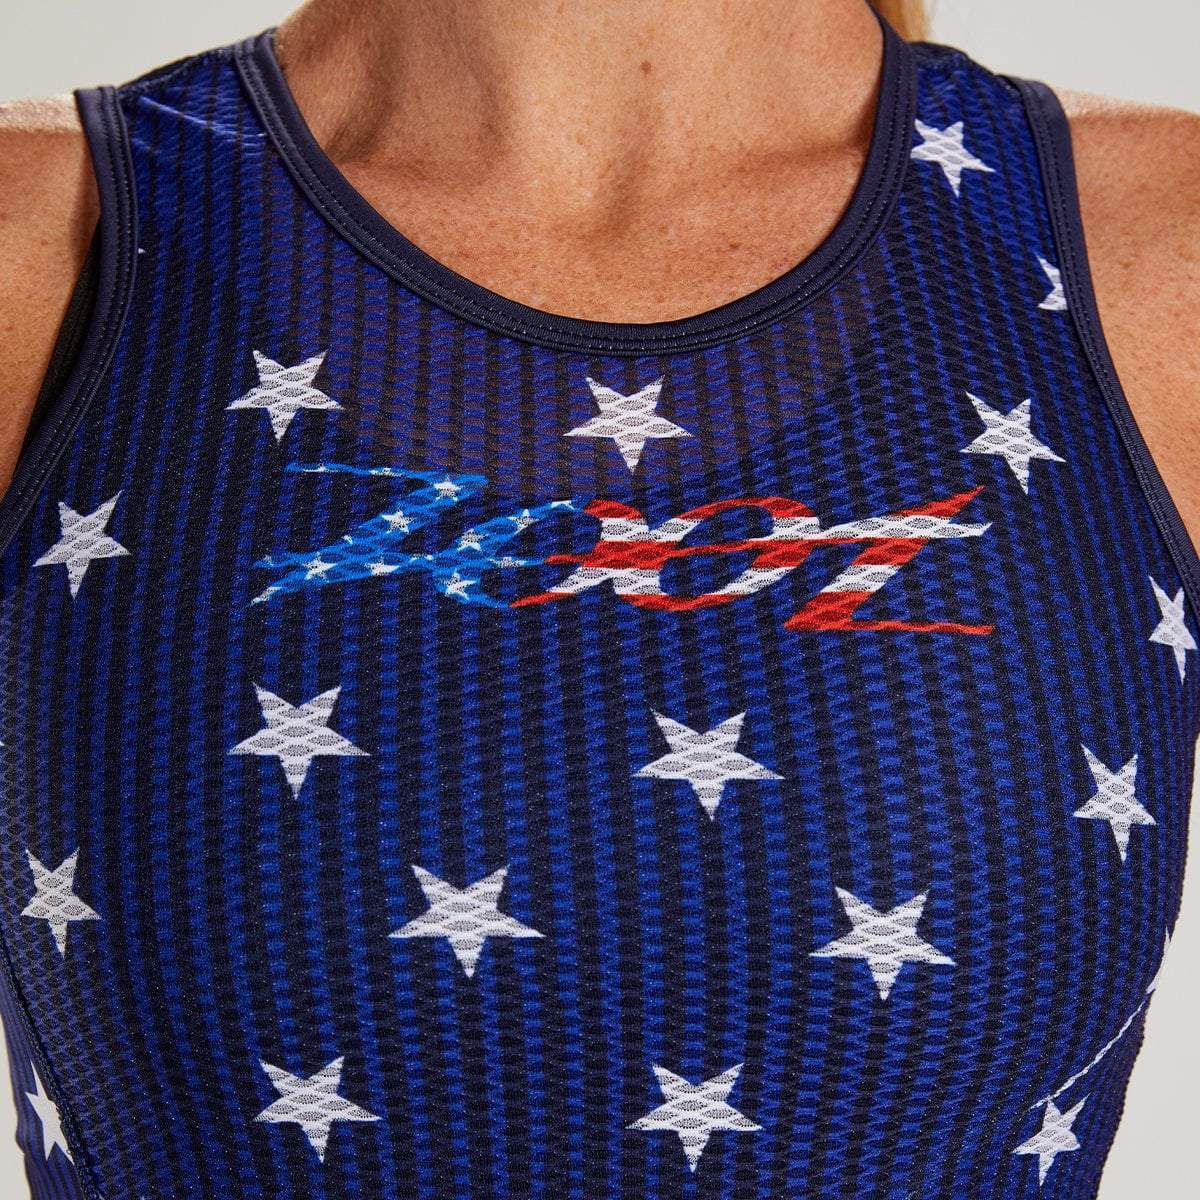 Zoot Sports CYCLE APPAREL WOMENS LTD CYCLE BASE LAYER - STARS & STRIPES